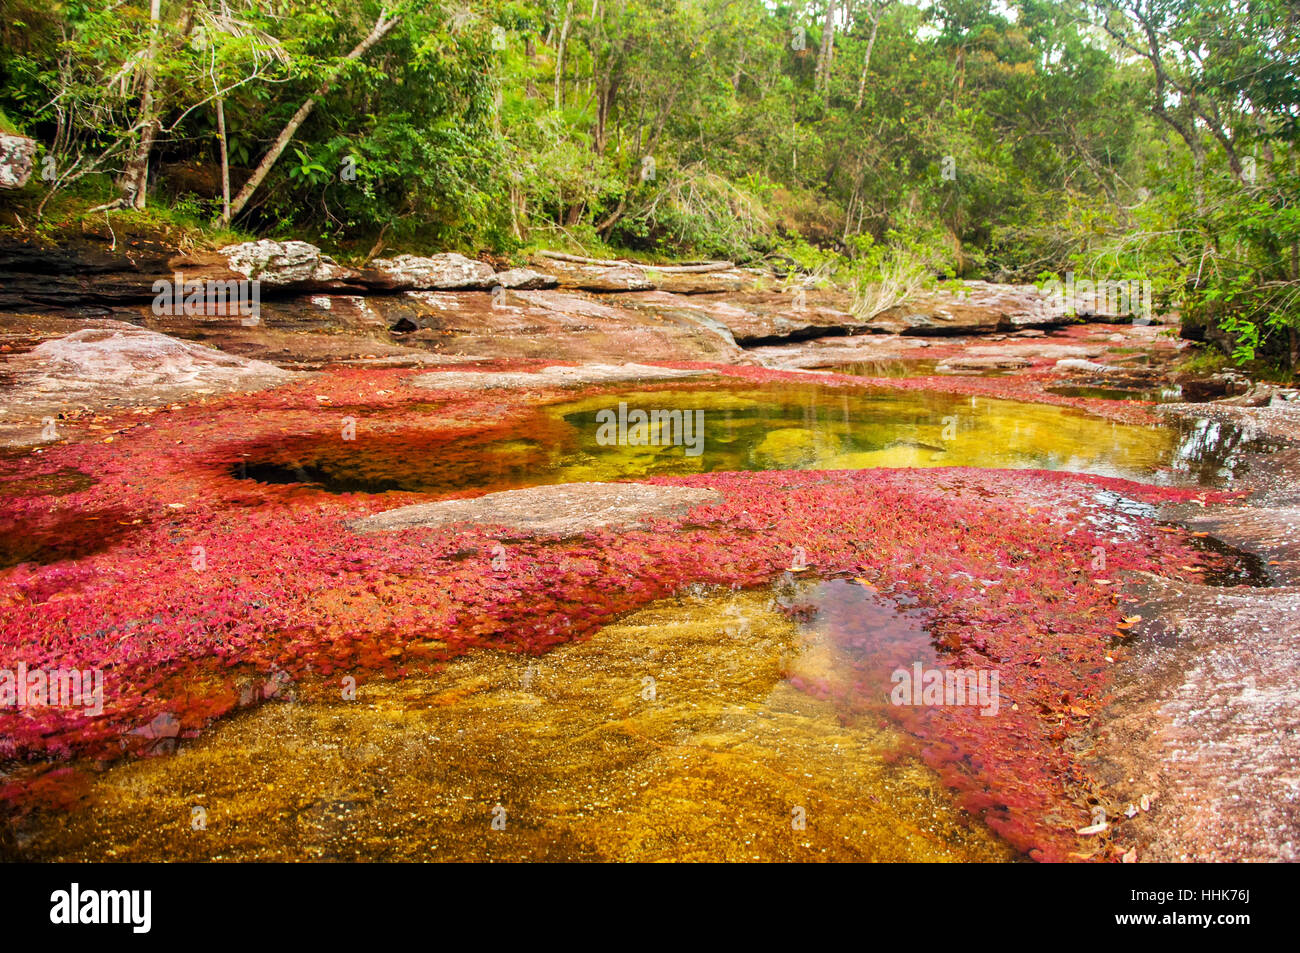 jungle, colombia, red, river, water, beautiful, beauteously, nice, travel, Stock Photo